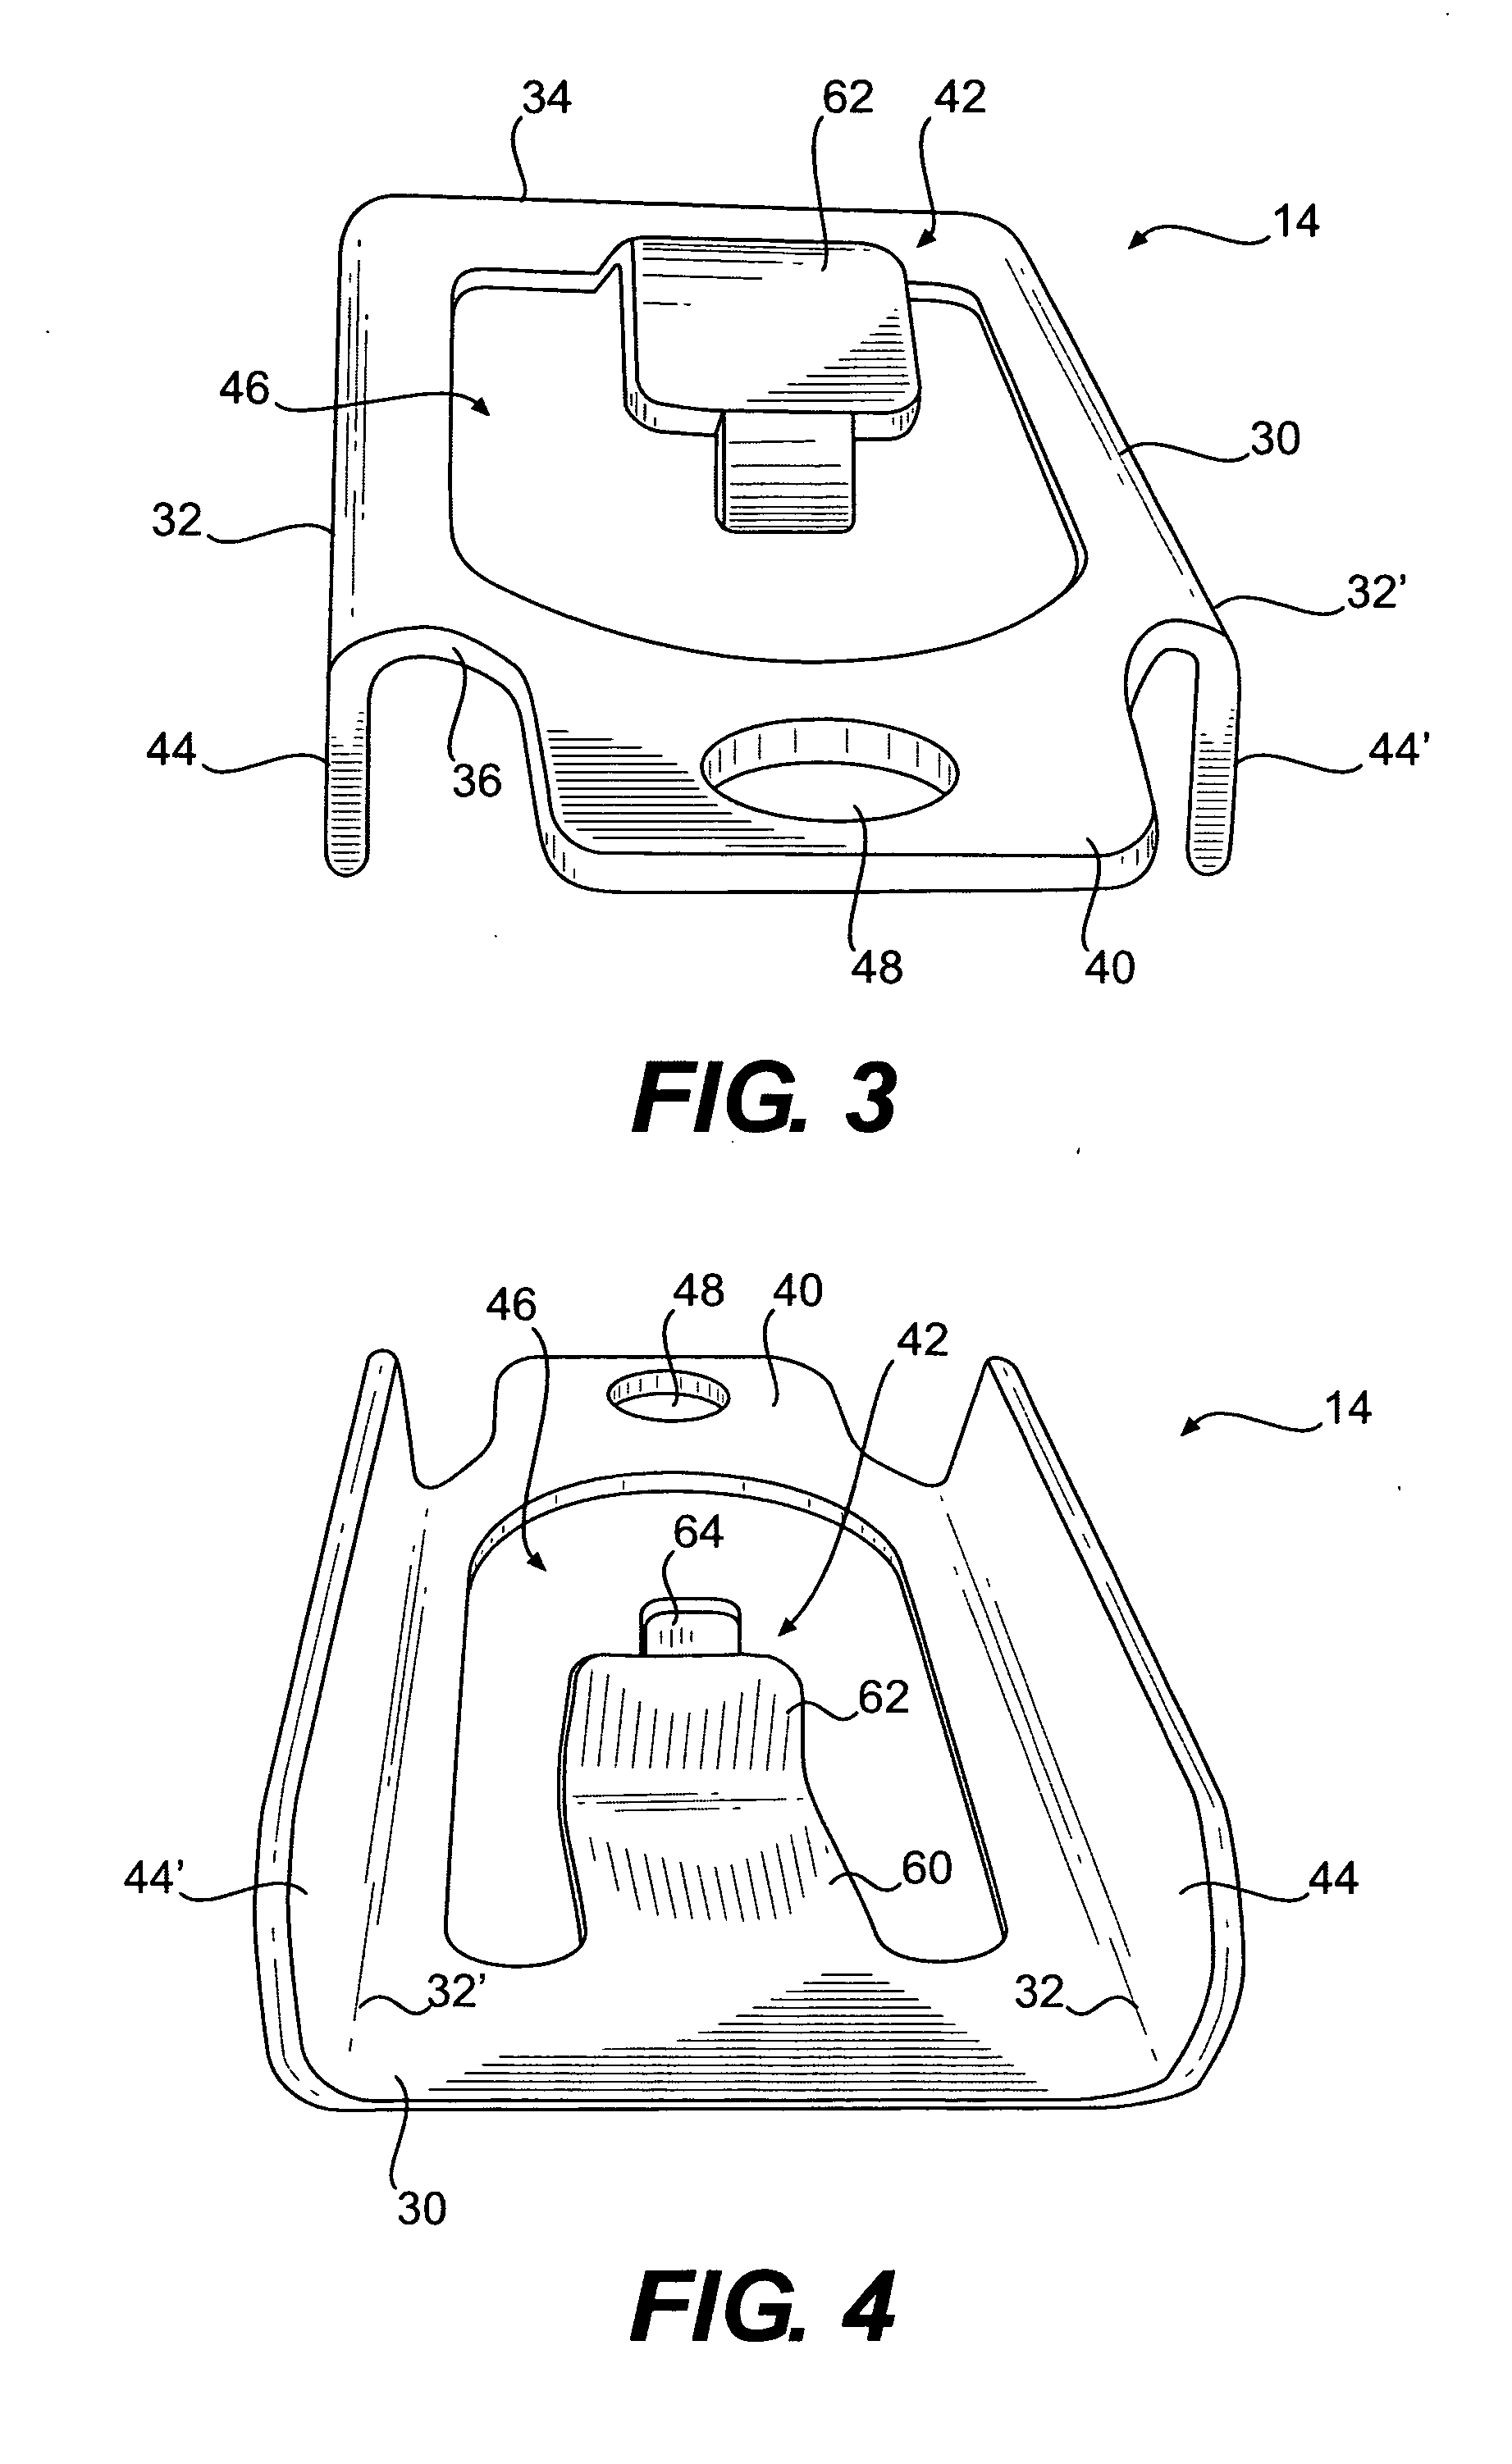 Gutter cover with a clip and method of installing the same